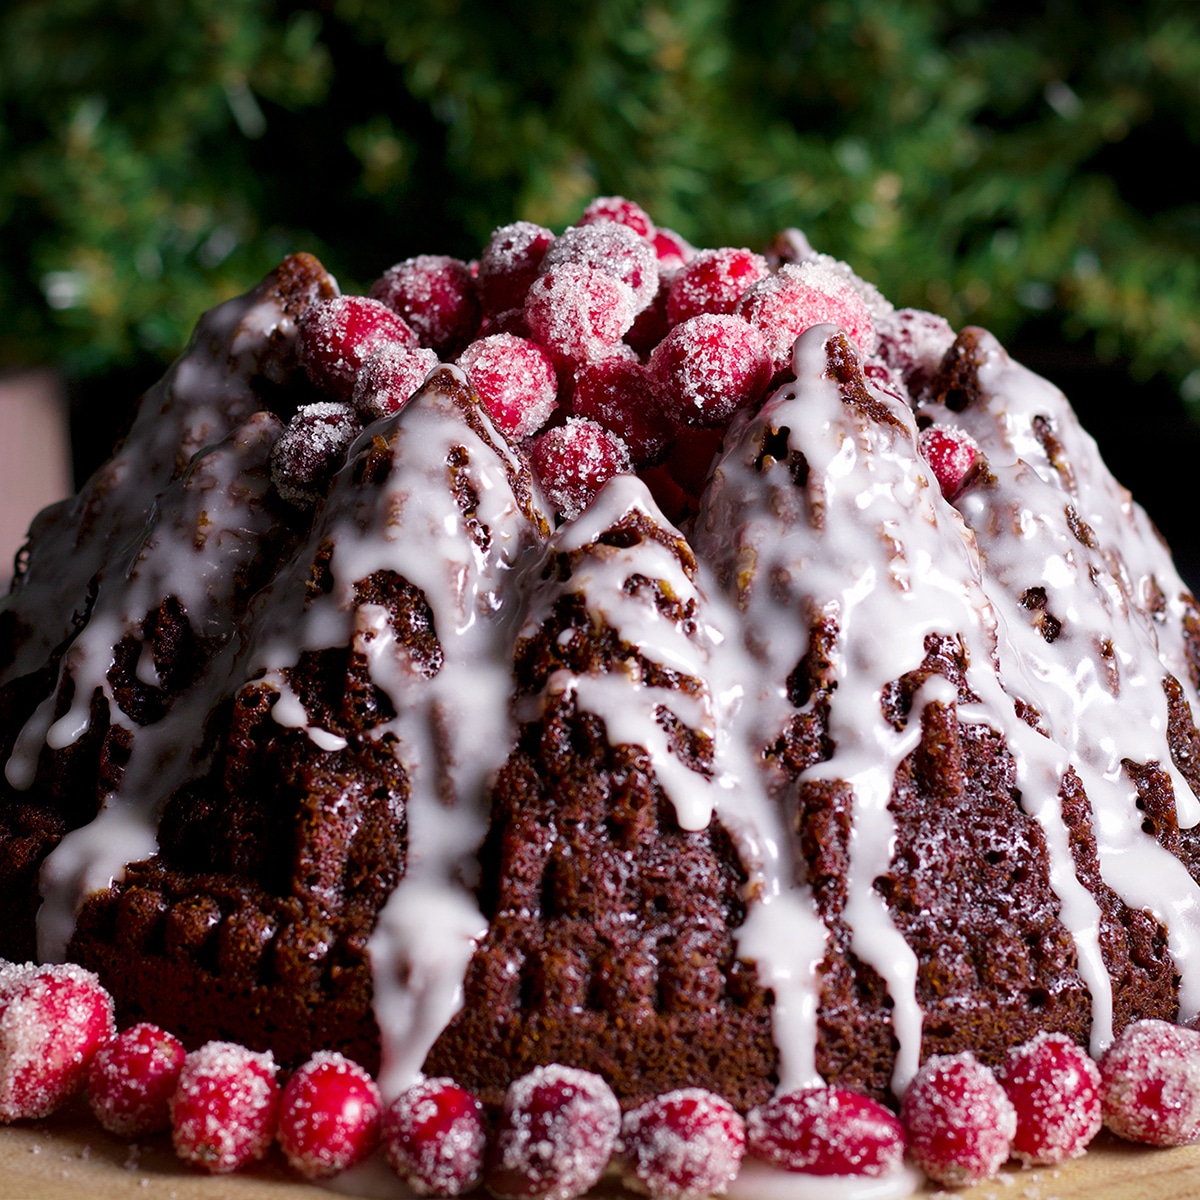 A gingerbread cake that's been baked in a pine tree forest Bundt Cake pan, covered with lemon glaze, and topped with sugared cranberries.